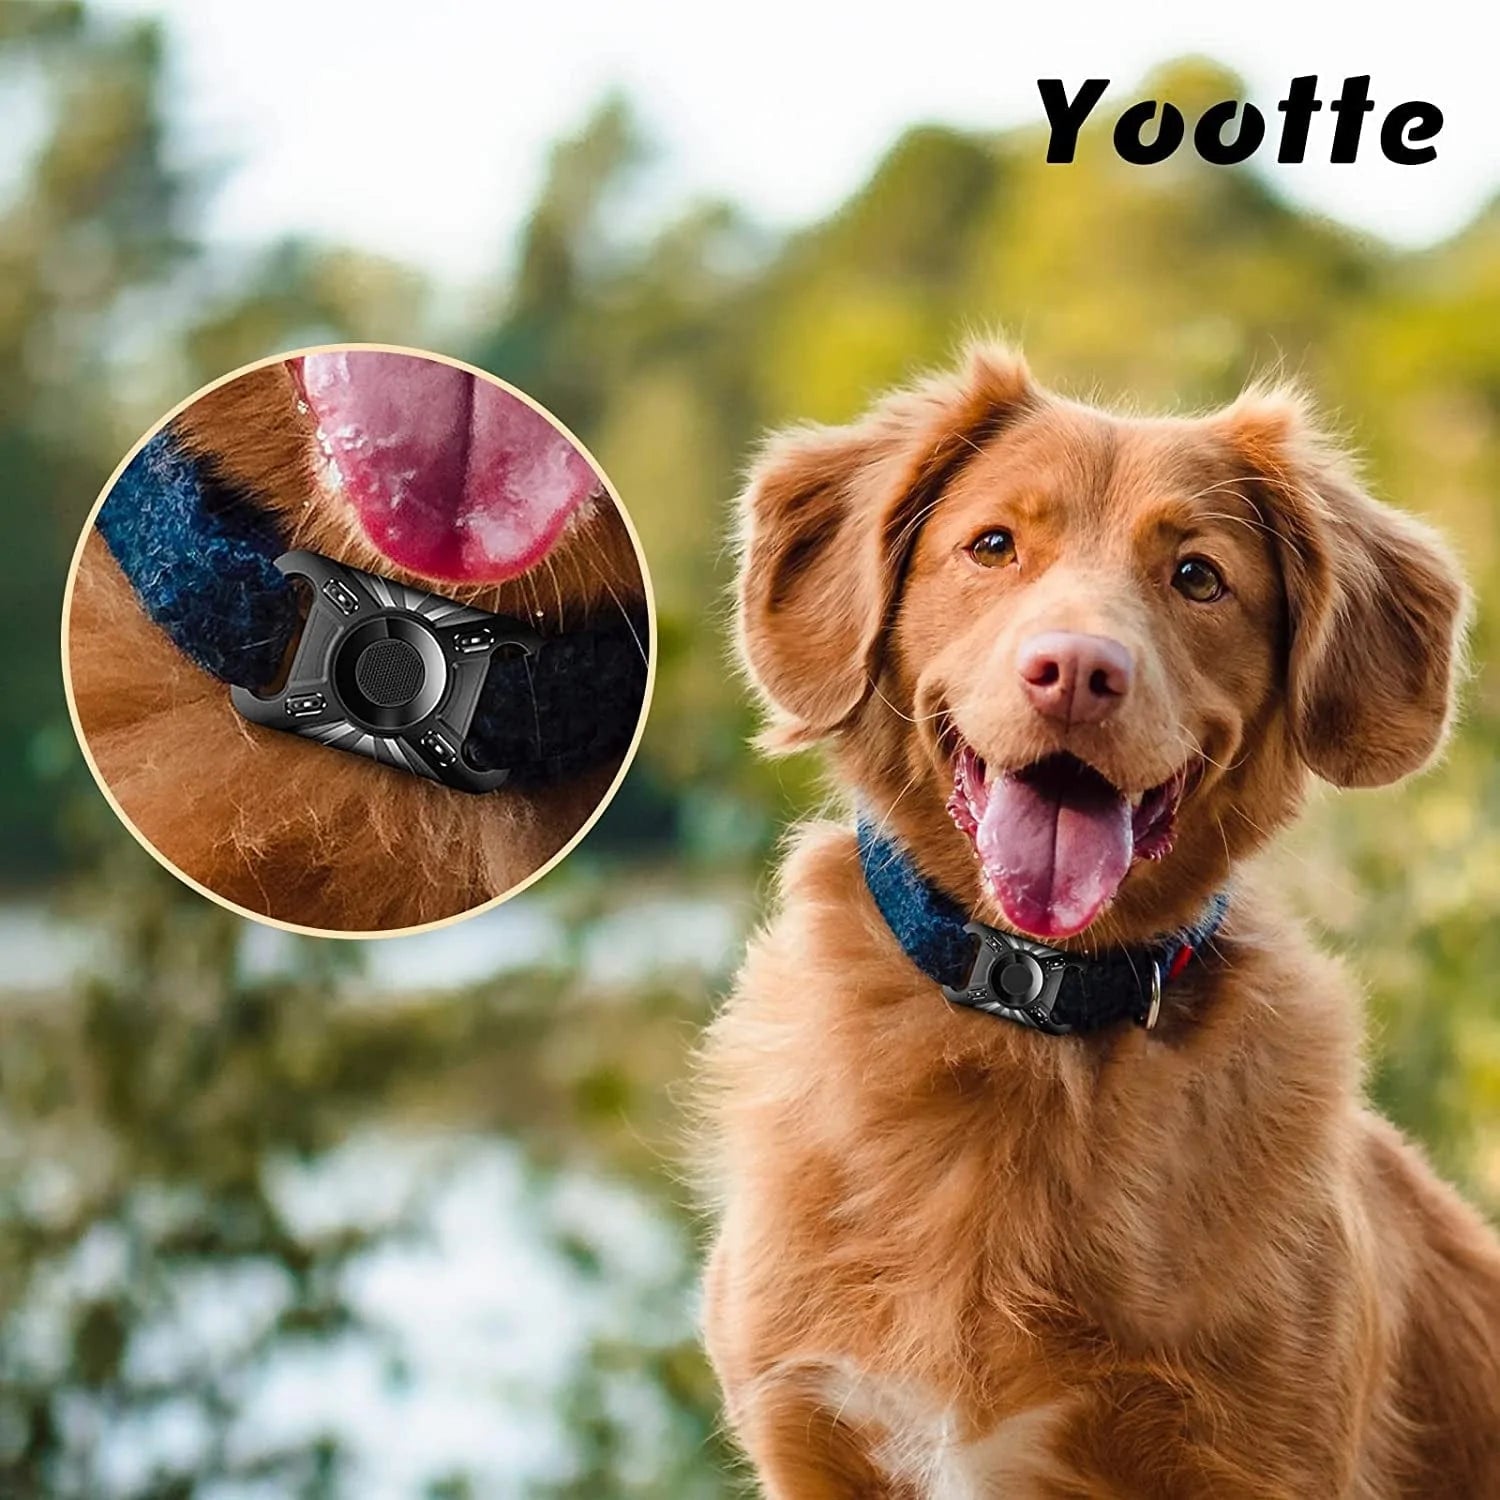 [2Pack] Waterproof Airtag Dog Collar Holder, Wear-Resistant Anti-Scratch Protective Airtag Holder Case Compatible with Pet Collar GPS Pet Trackers for Dogs Big Cats Backpack Strap Etc